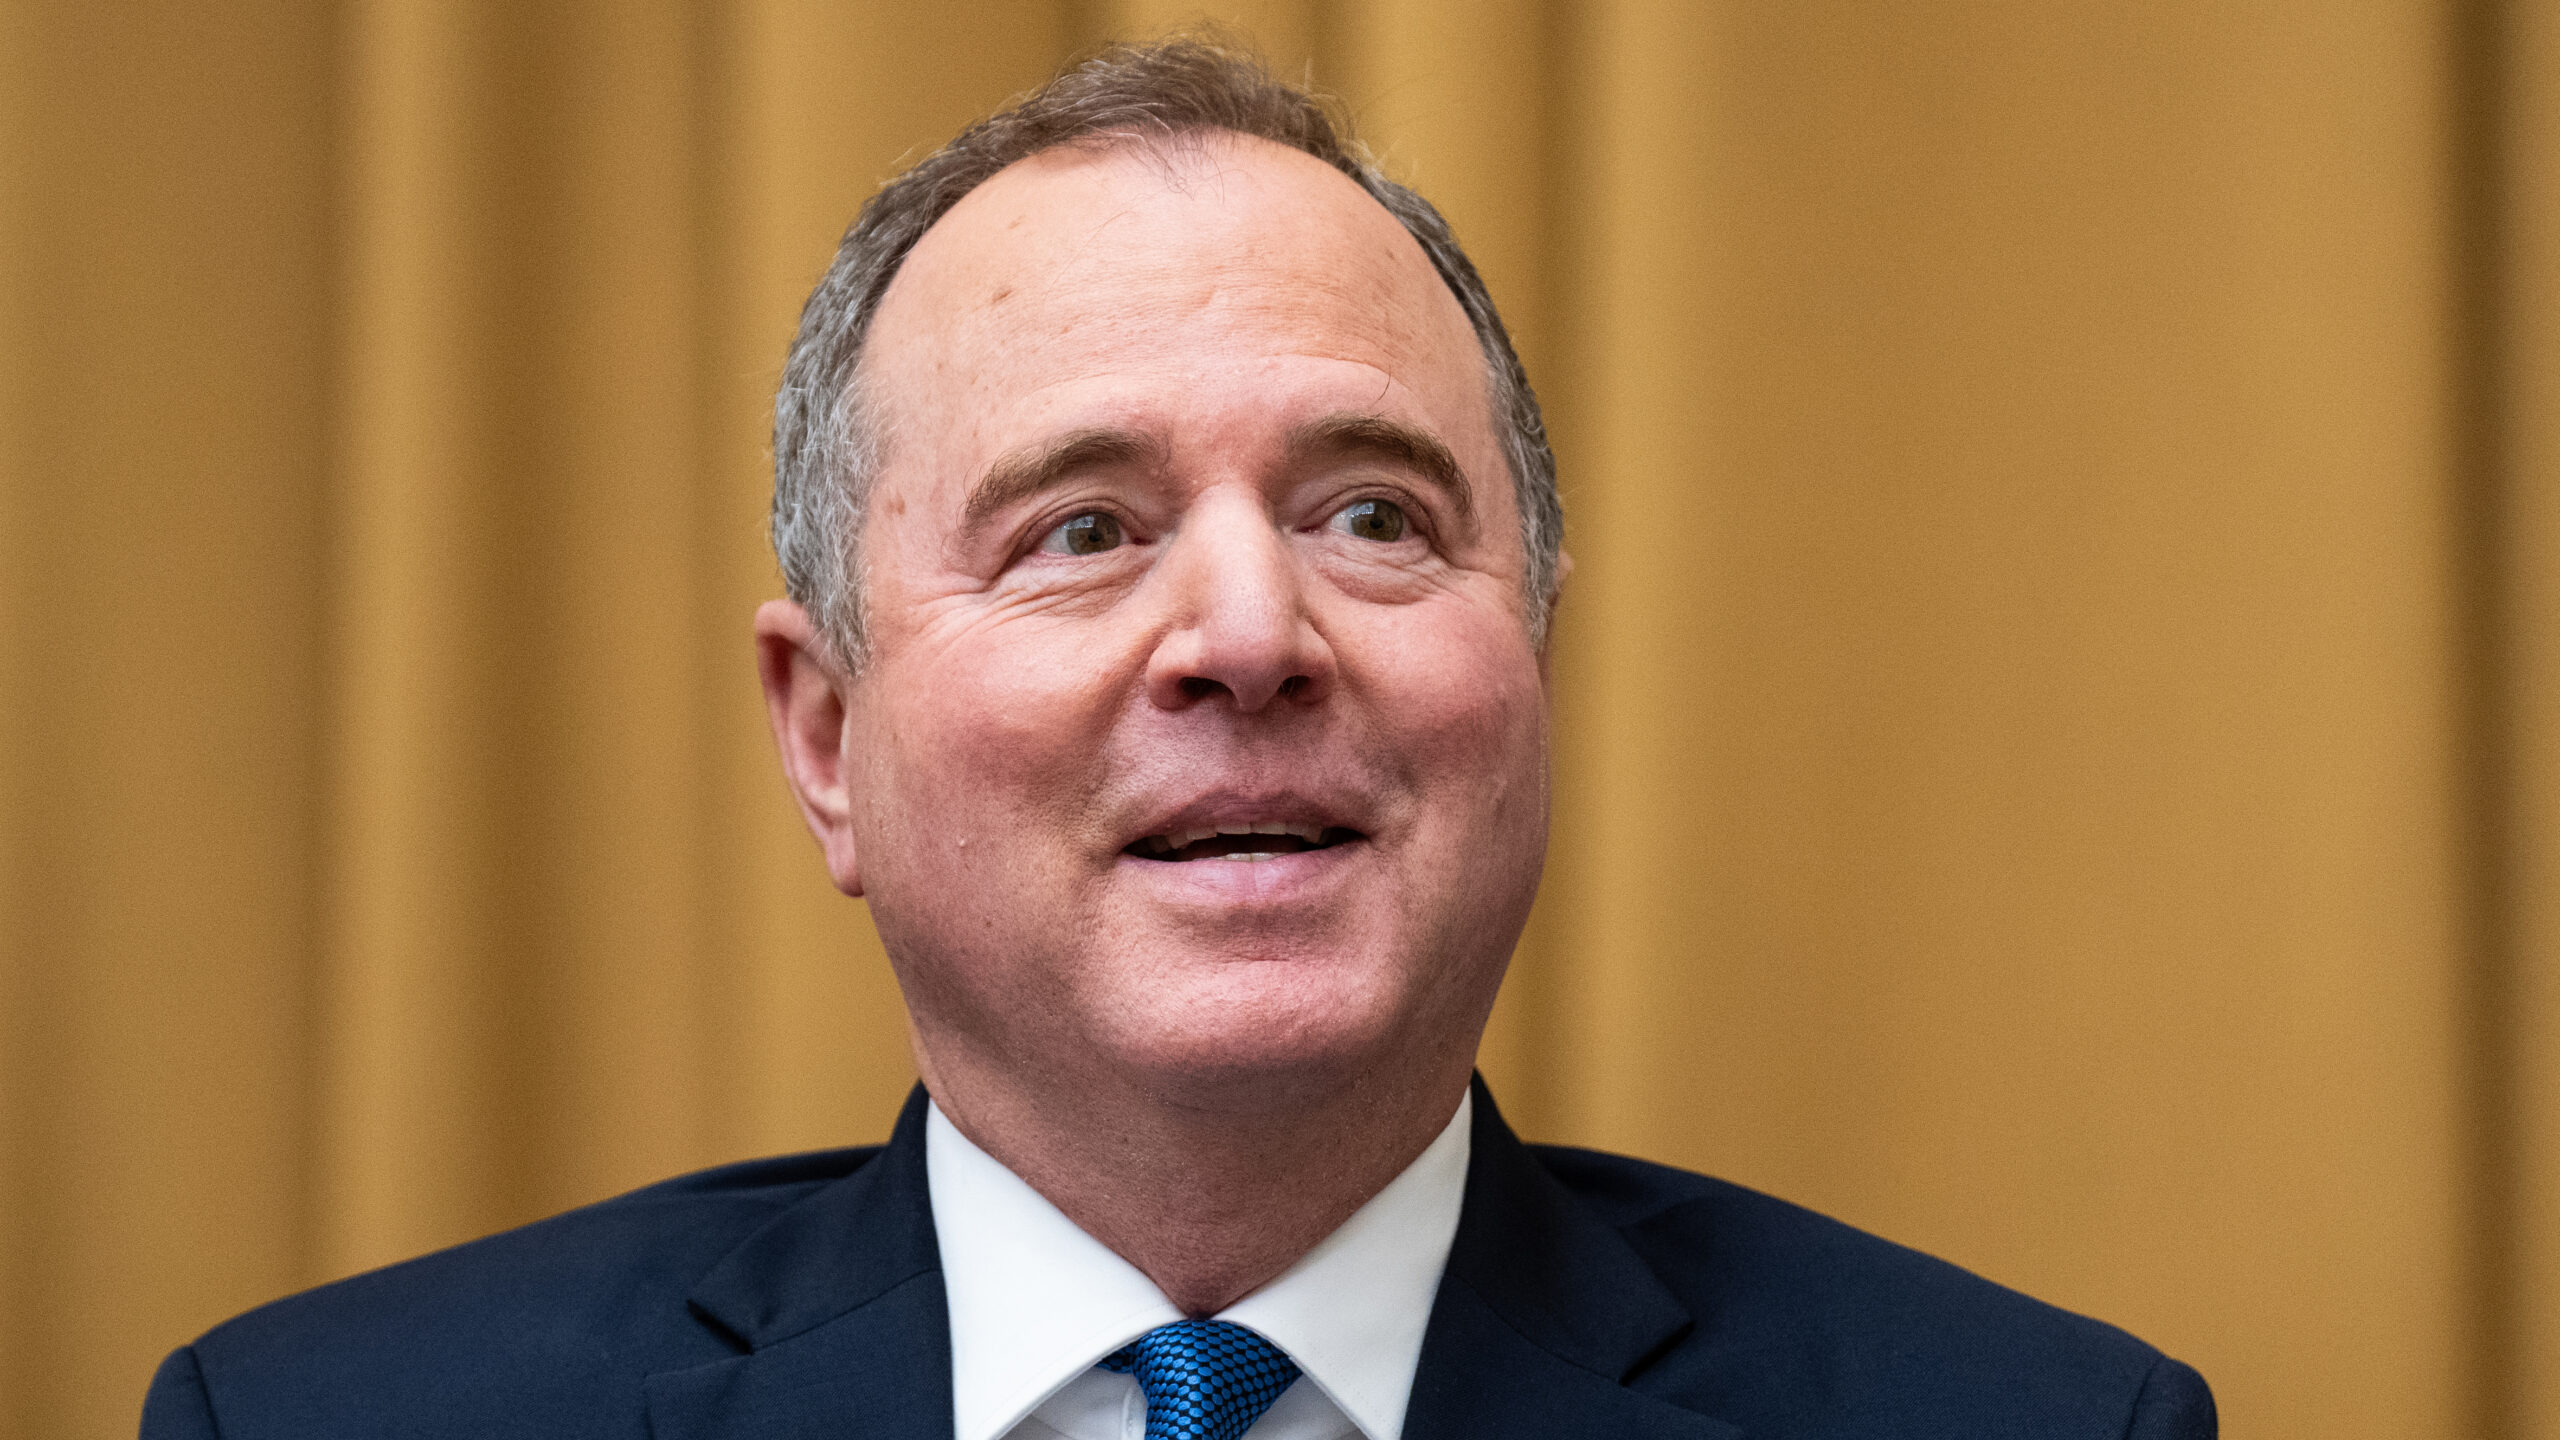 Democrat Adam Schiff: If Trump Took A Cognitive Test It Would Show ‘Serious Illness Of One Kind Or Another’